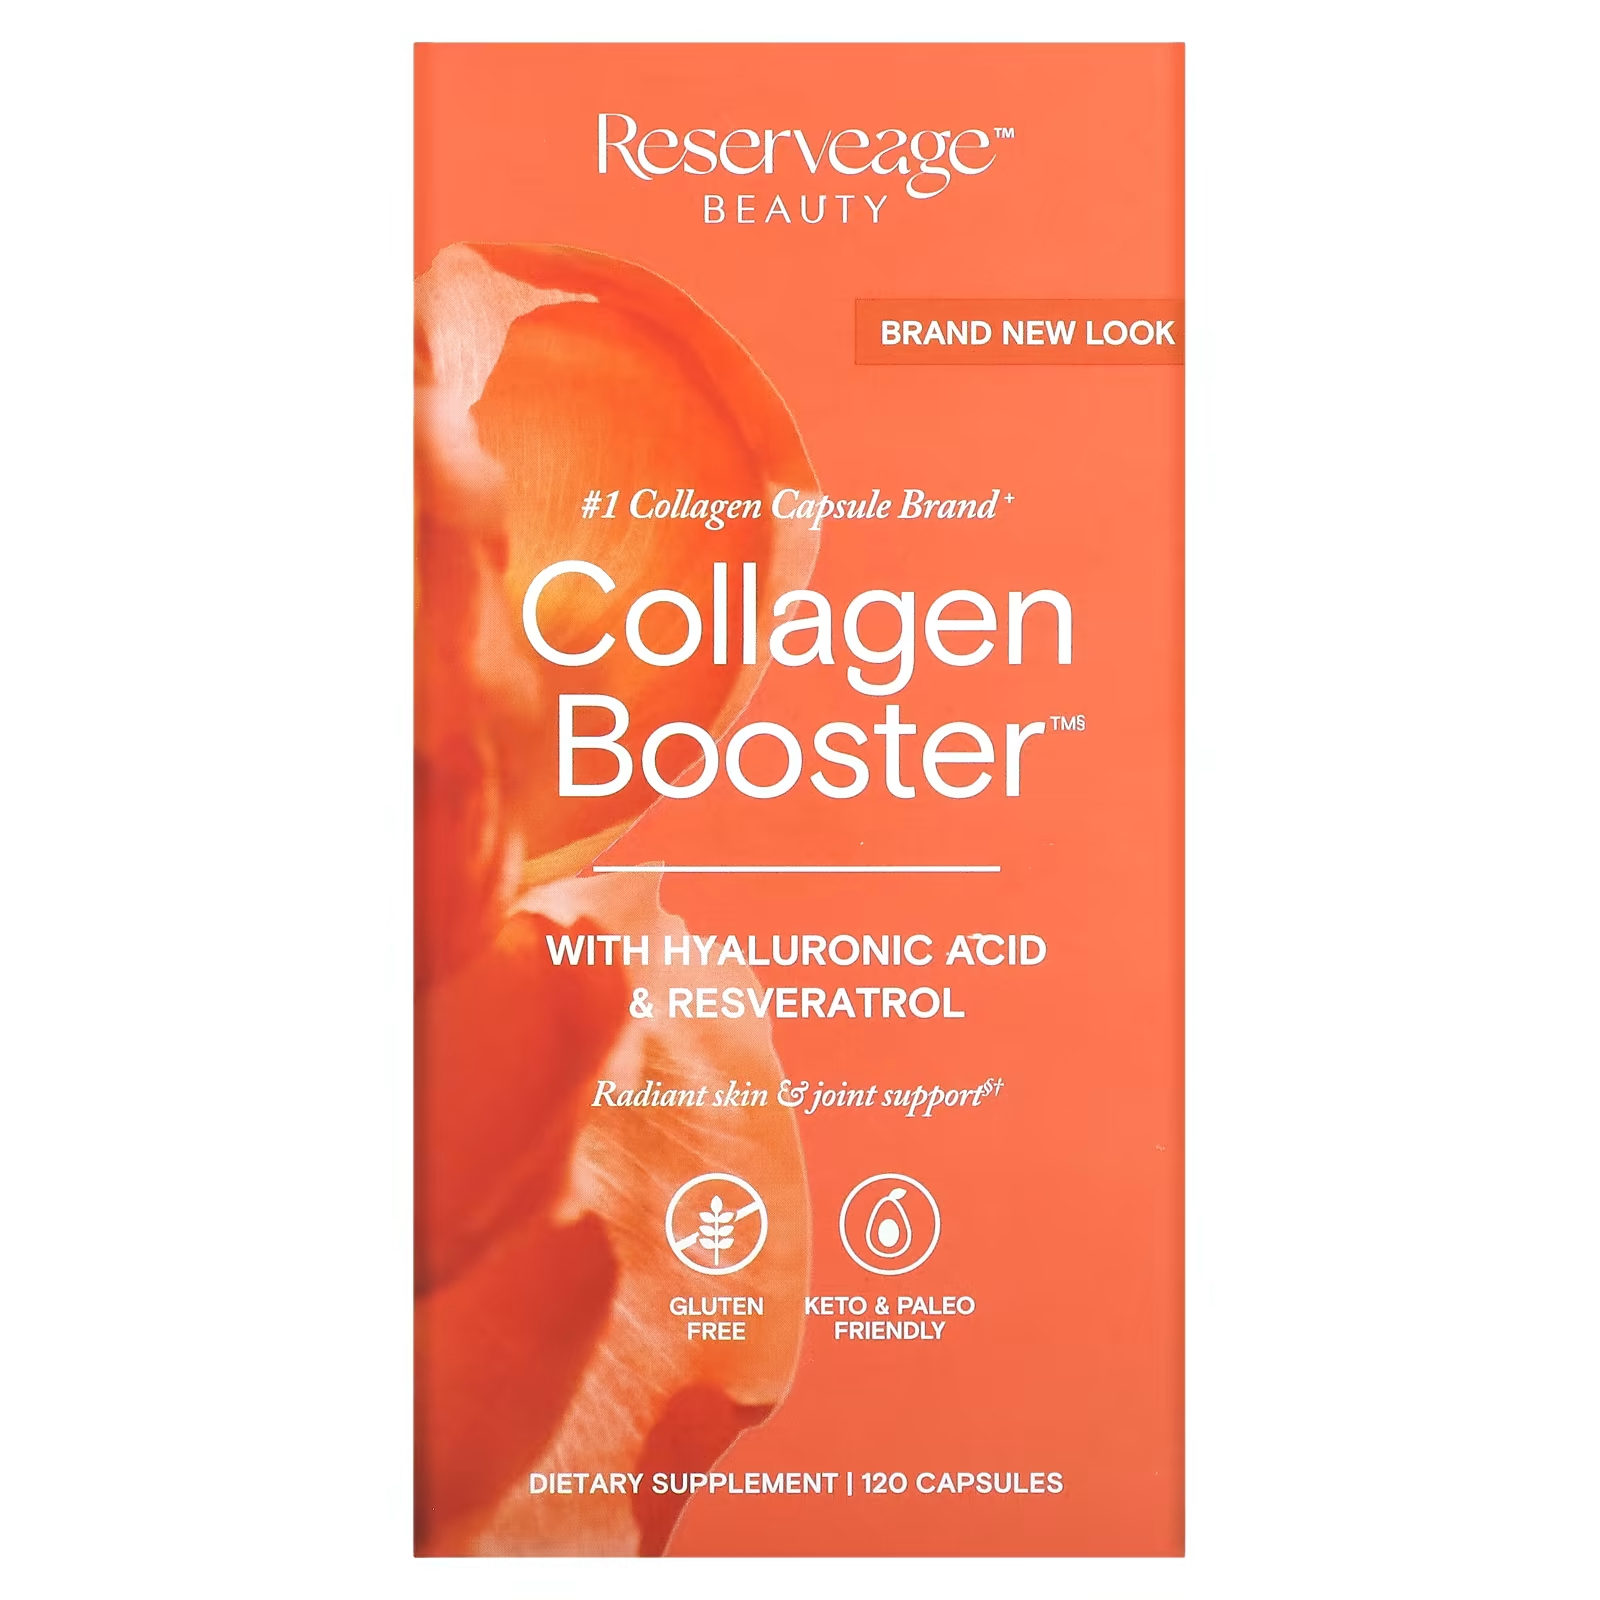 Пищевая добавка Reserveage Nutrition Collagen Booster with Hyaluronic Acid & Resveratrol, 120 капсул reserveage nutrition ultra collagen booster 90 капсул